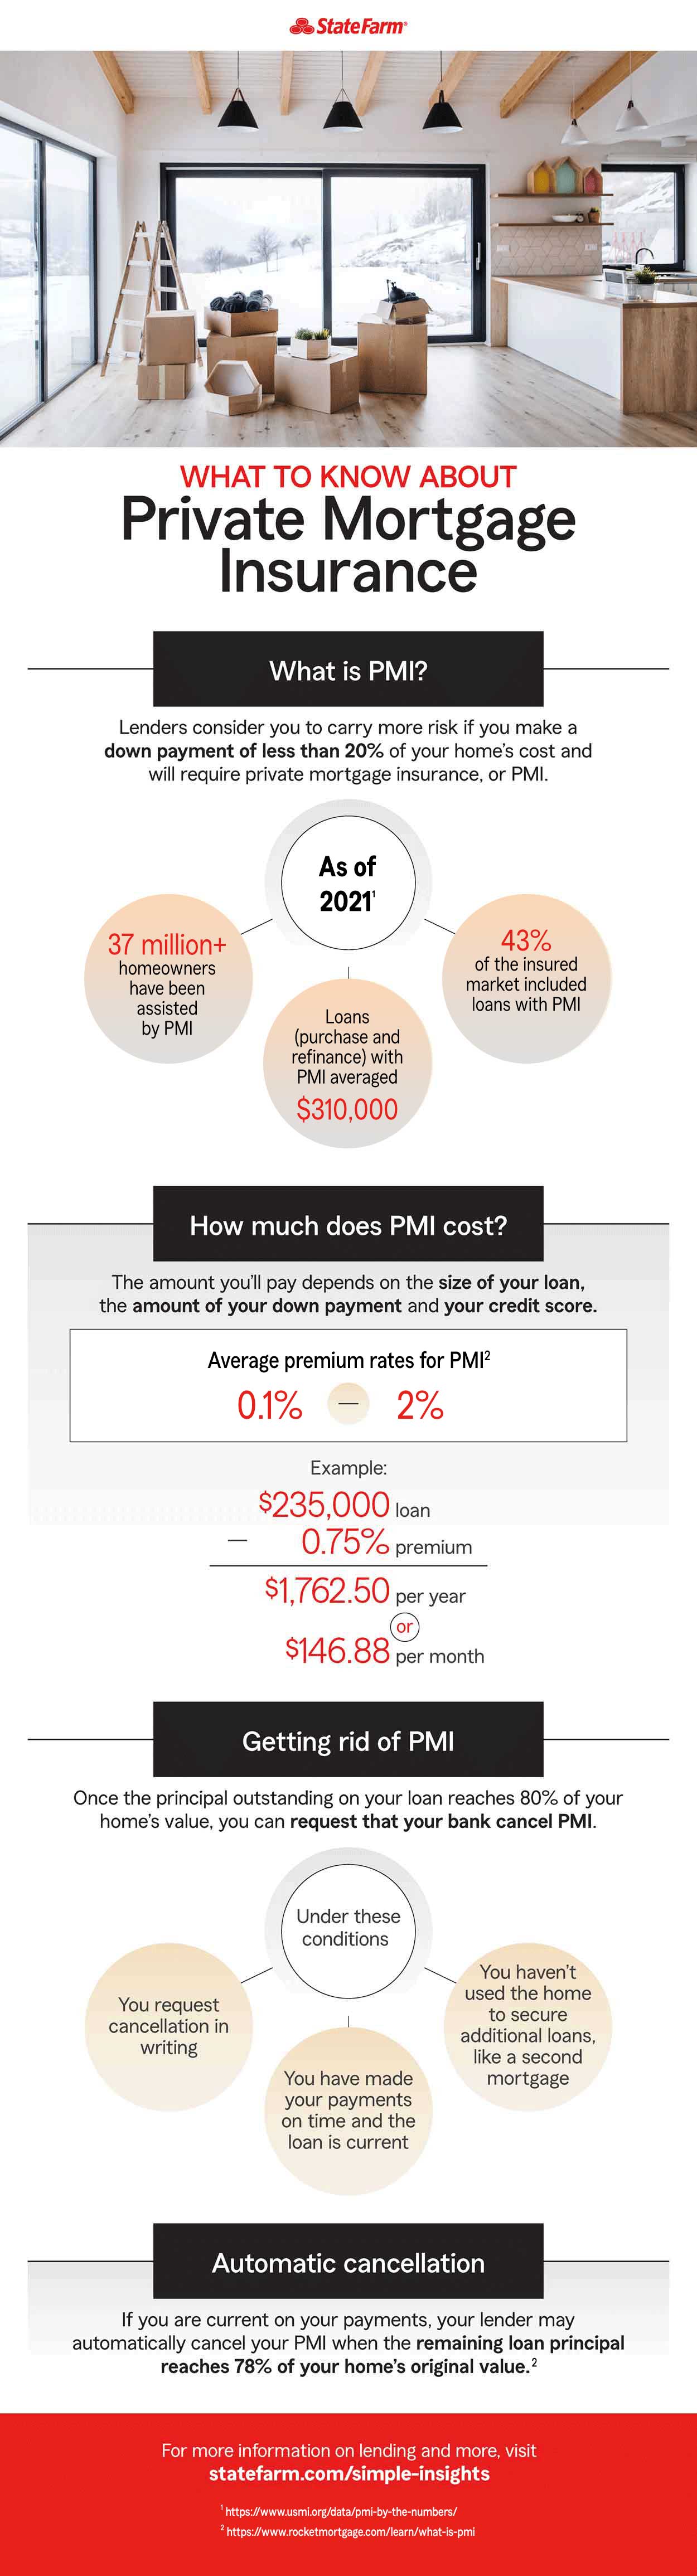 Infographic - Private Mortgage Insurance